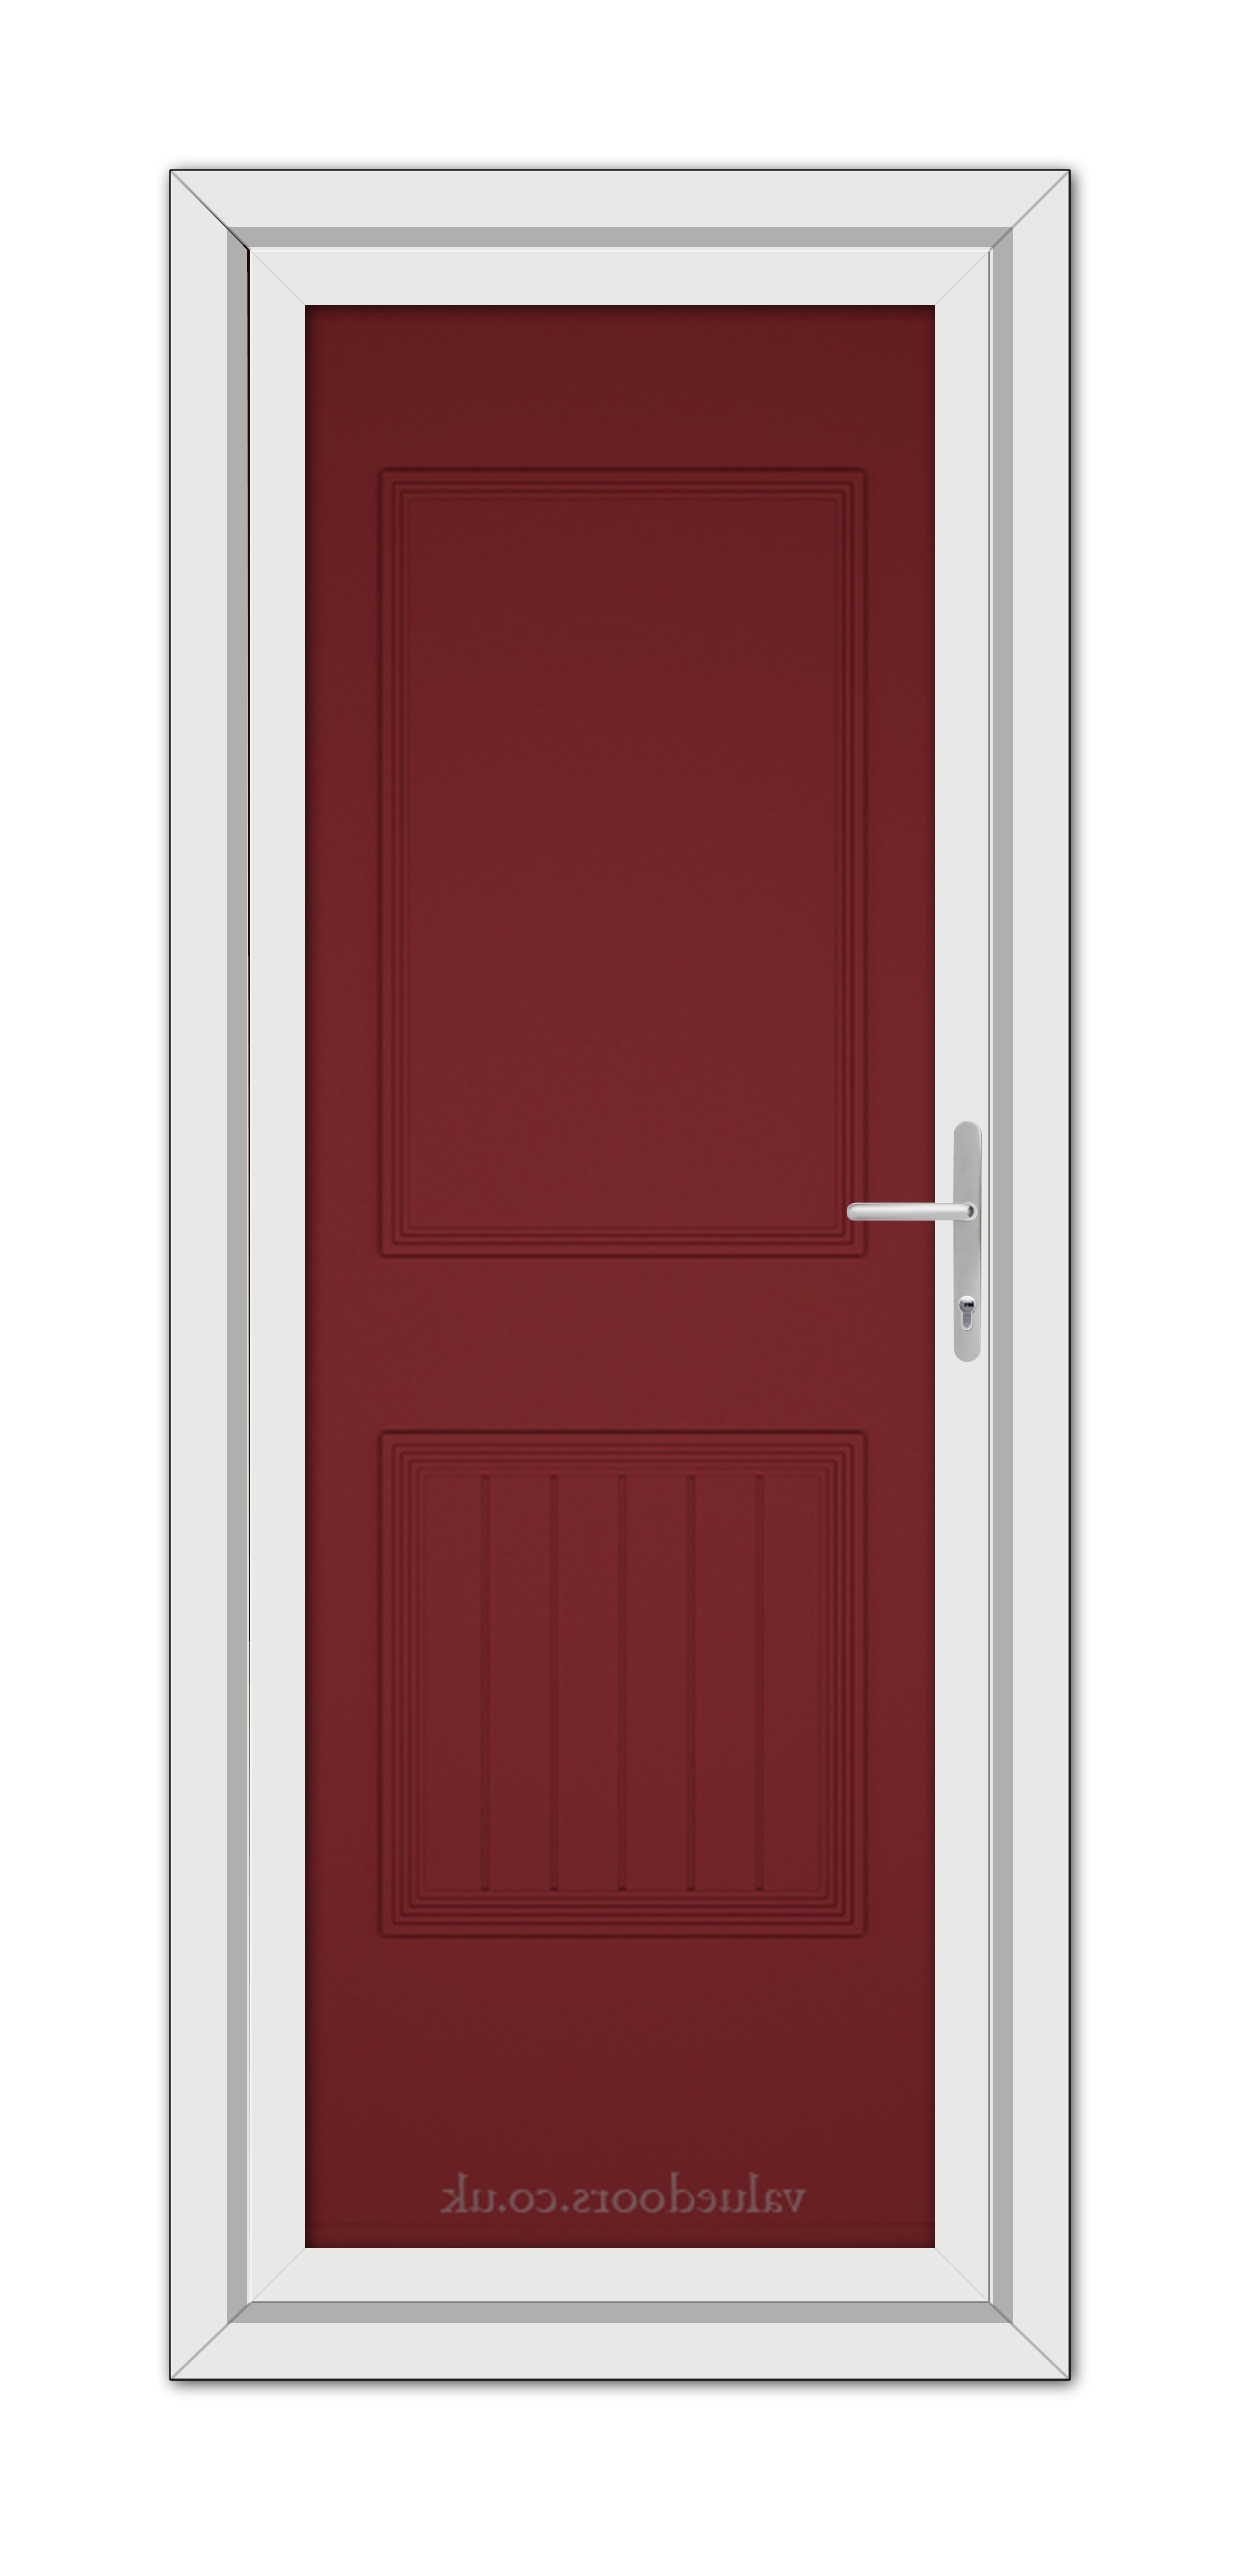 A Red Alnwick One Solid uPVC Door with white trim.